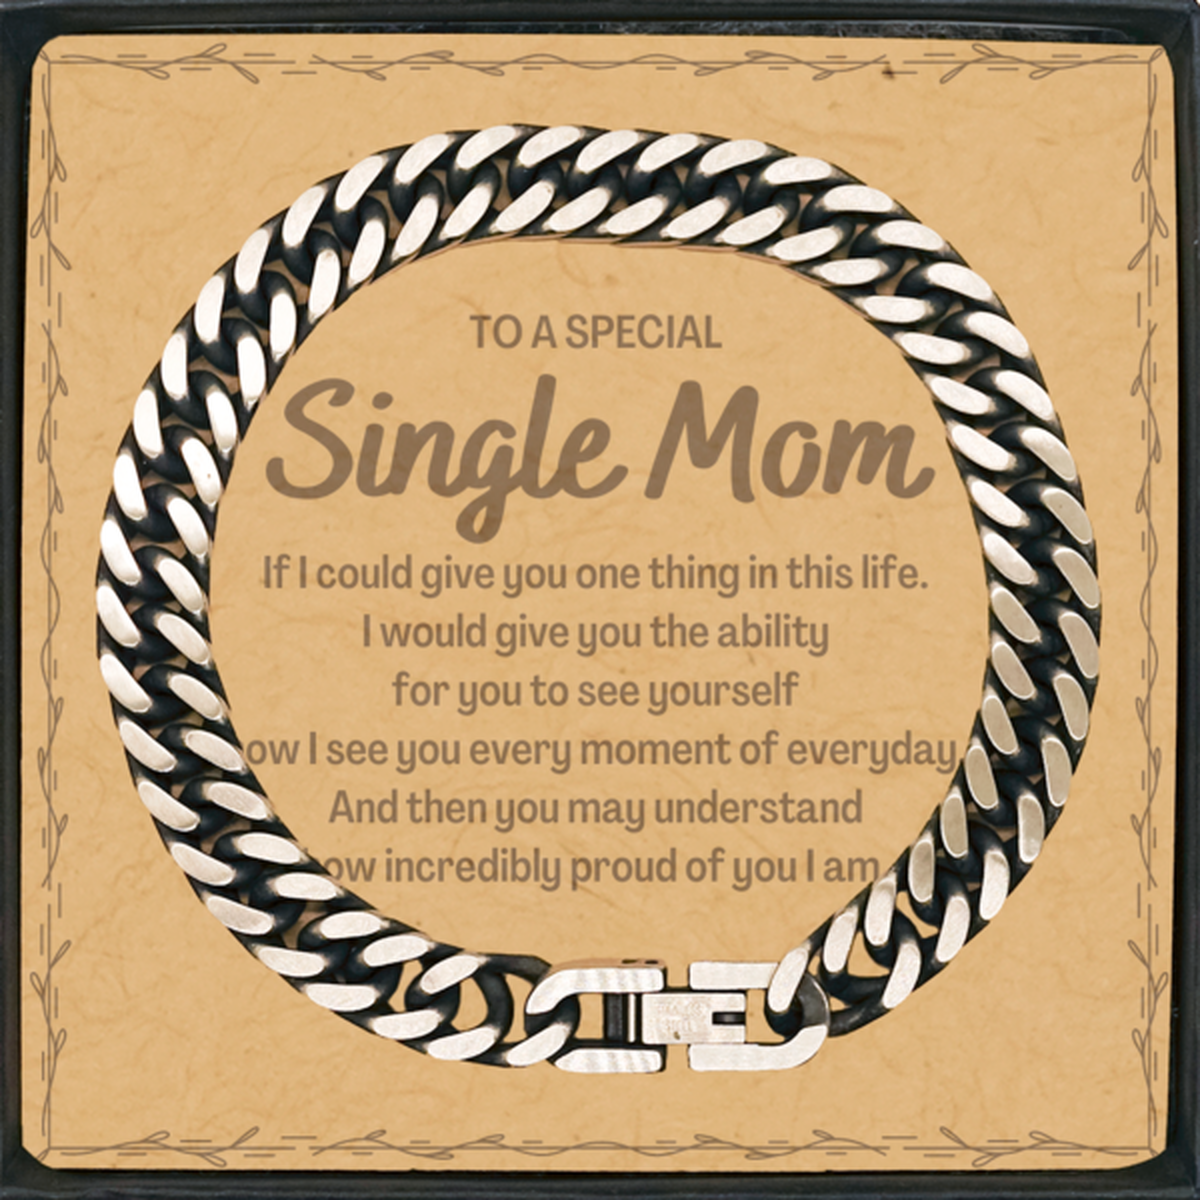 To My Single Mom Cuban Link Chain Bracelet, Gifts For Single Mom Message Card, Inspirational Gifts for Christmas Birthday, Epic Gifts for Single Mom To A Special Single Mom how incredibly proud of you I am